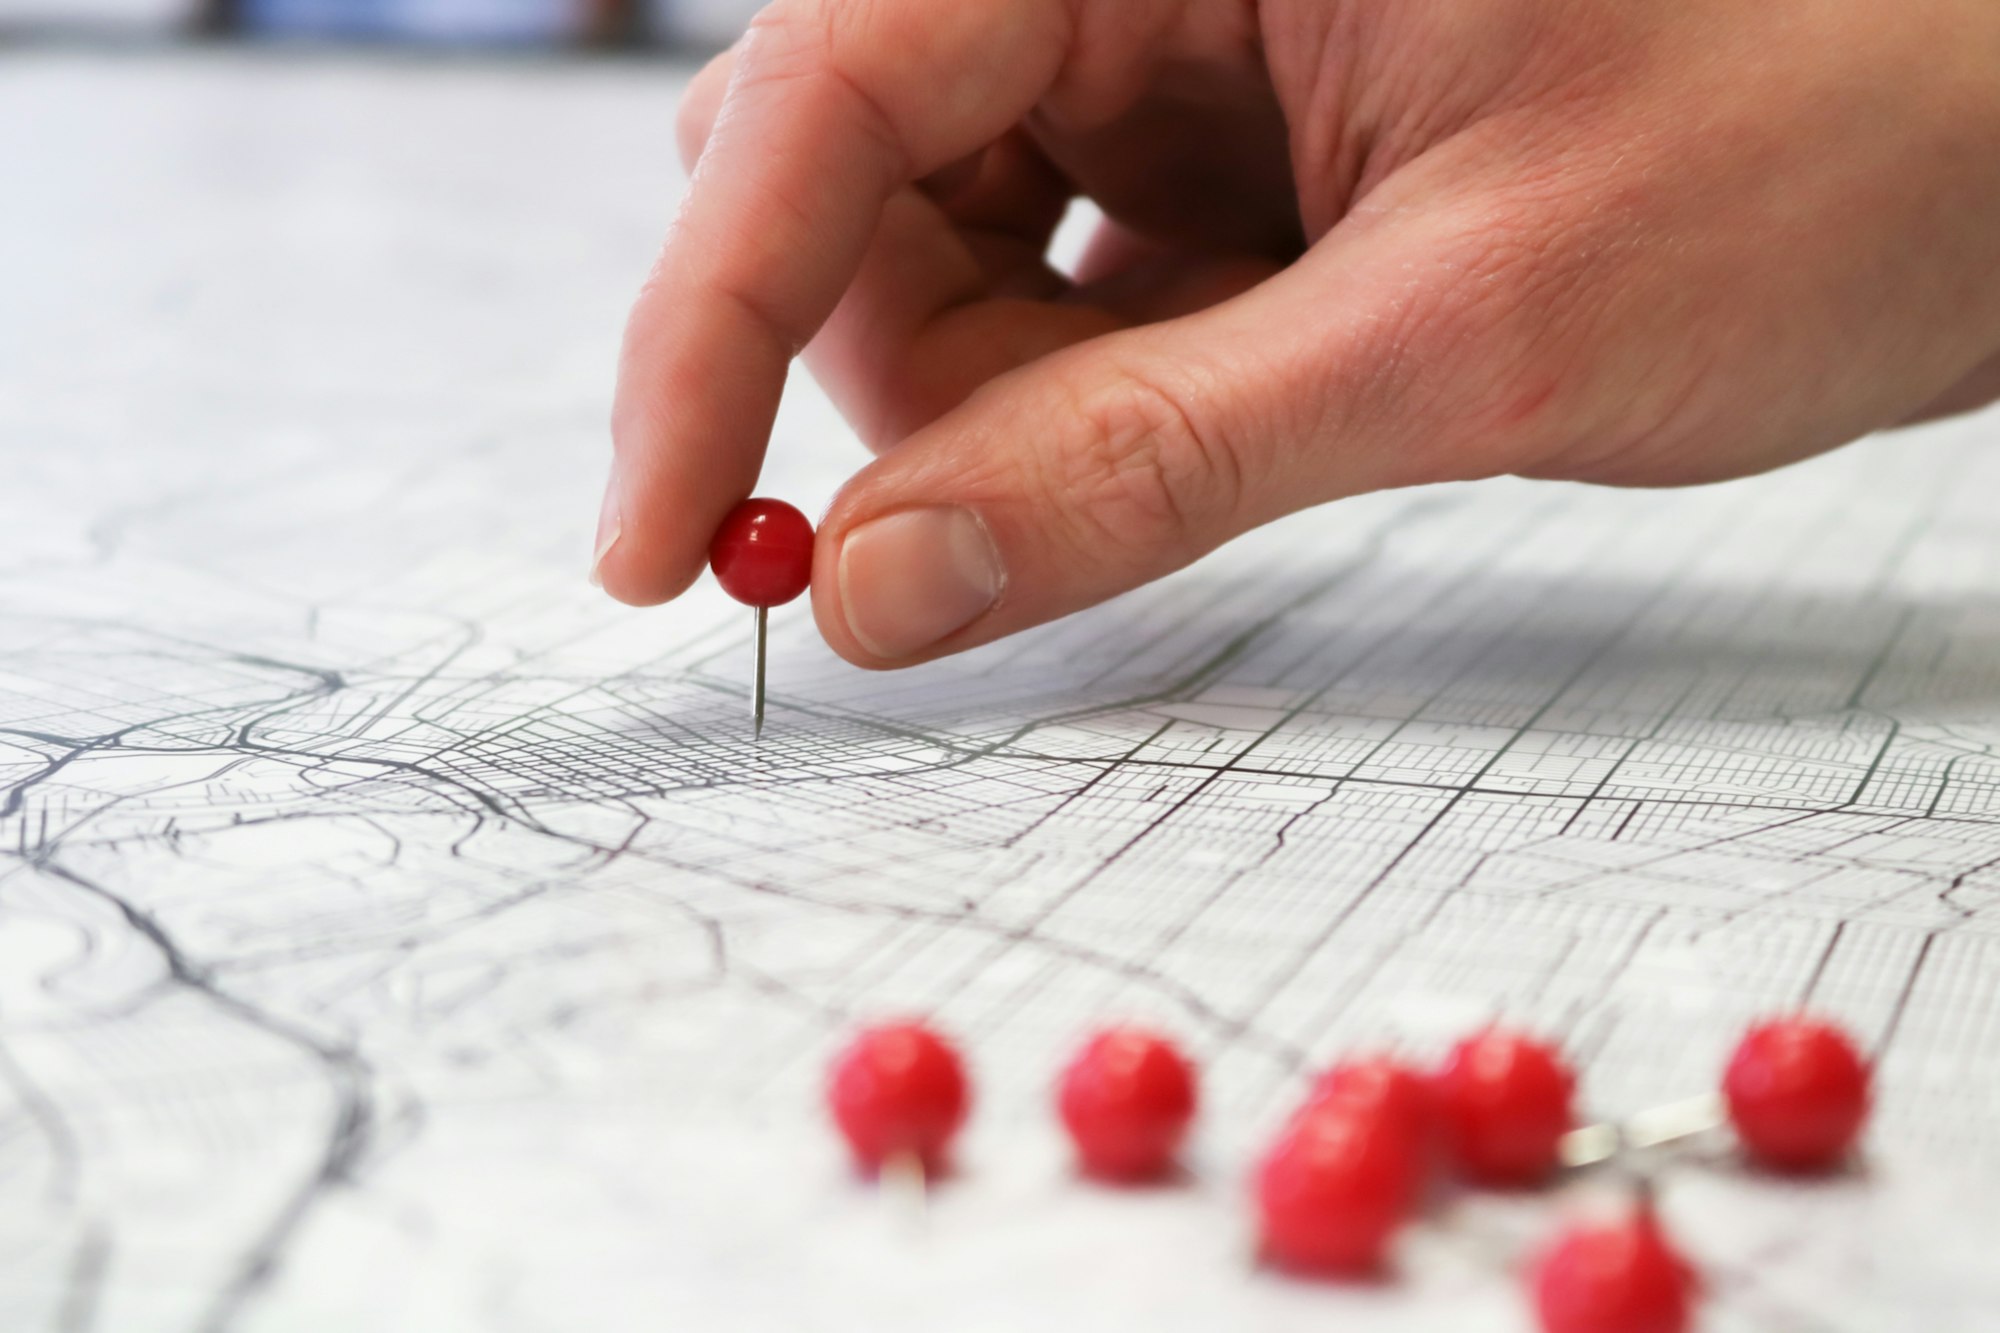 Placing red push pins into city street map. 